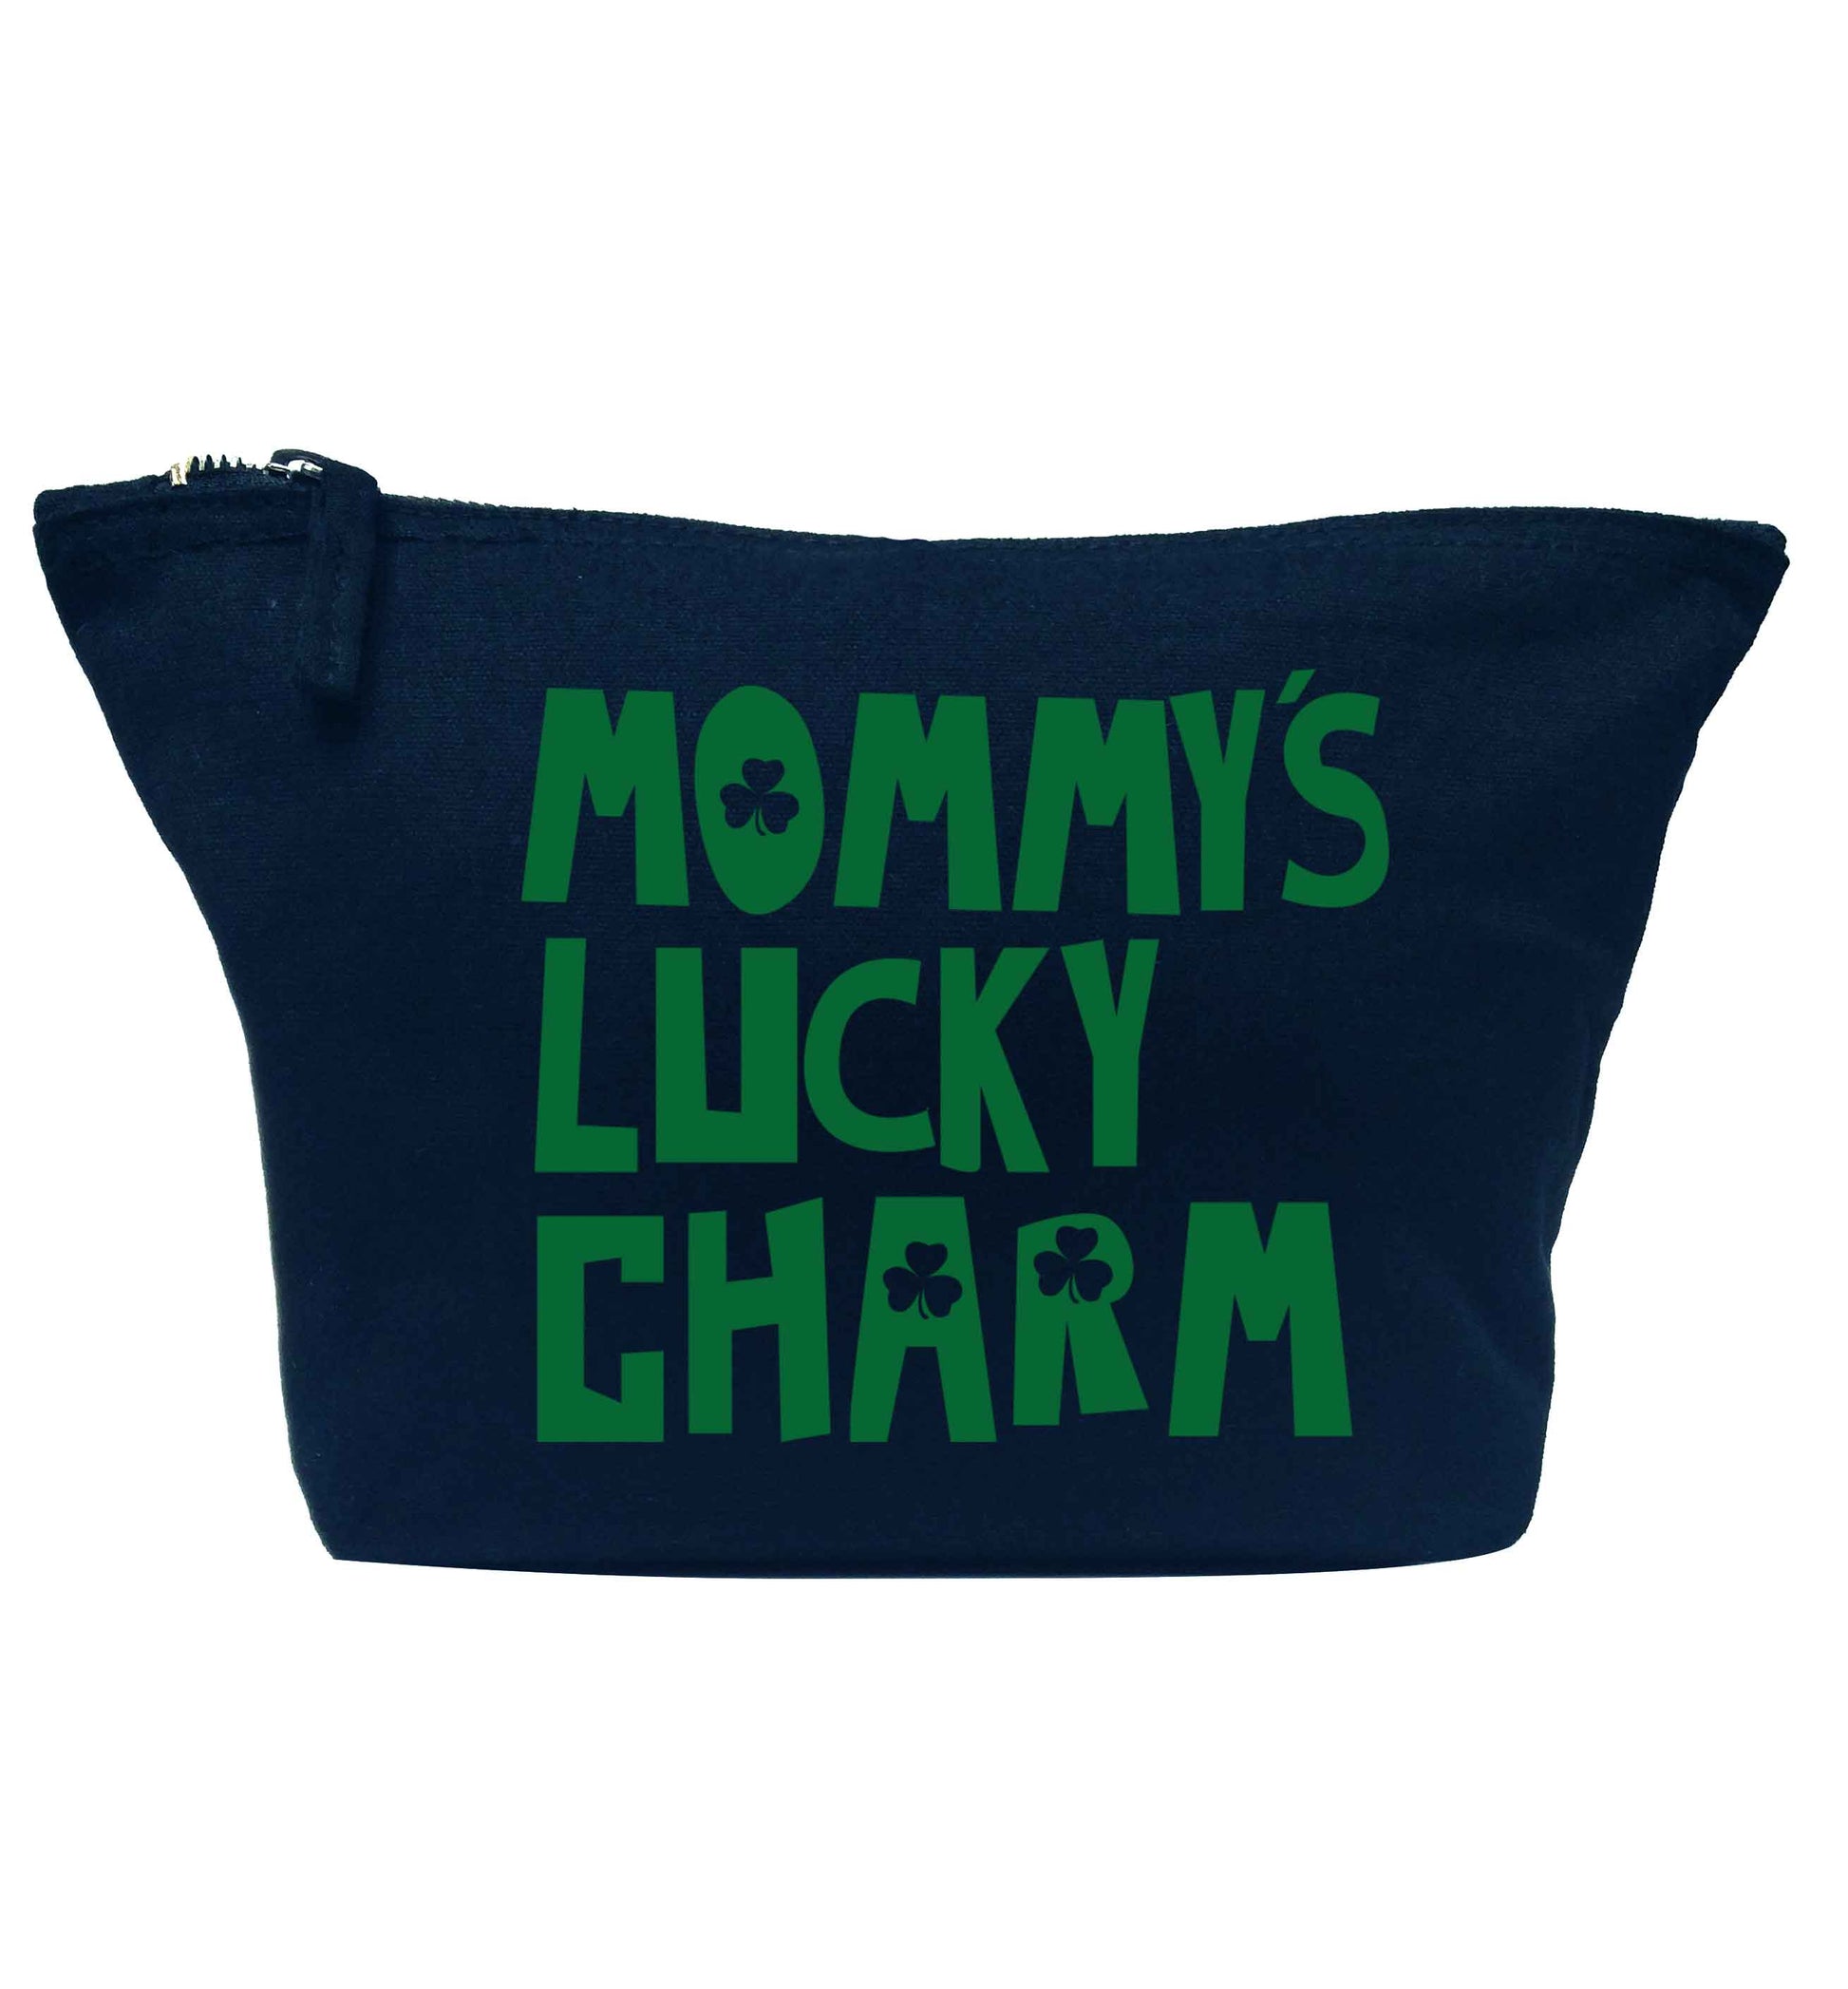 Mommy's lucky charm navy makeup bag